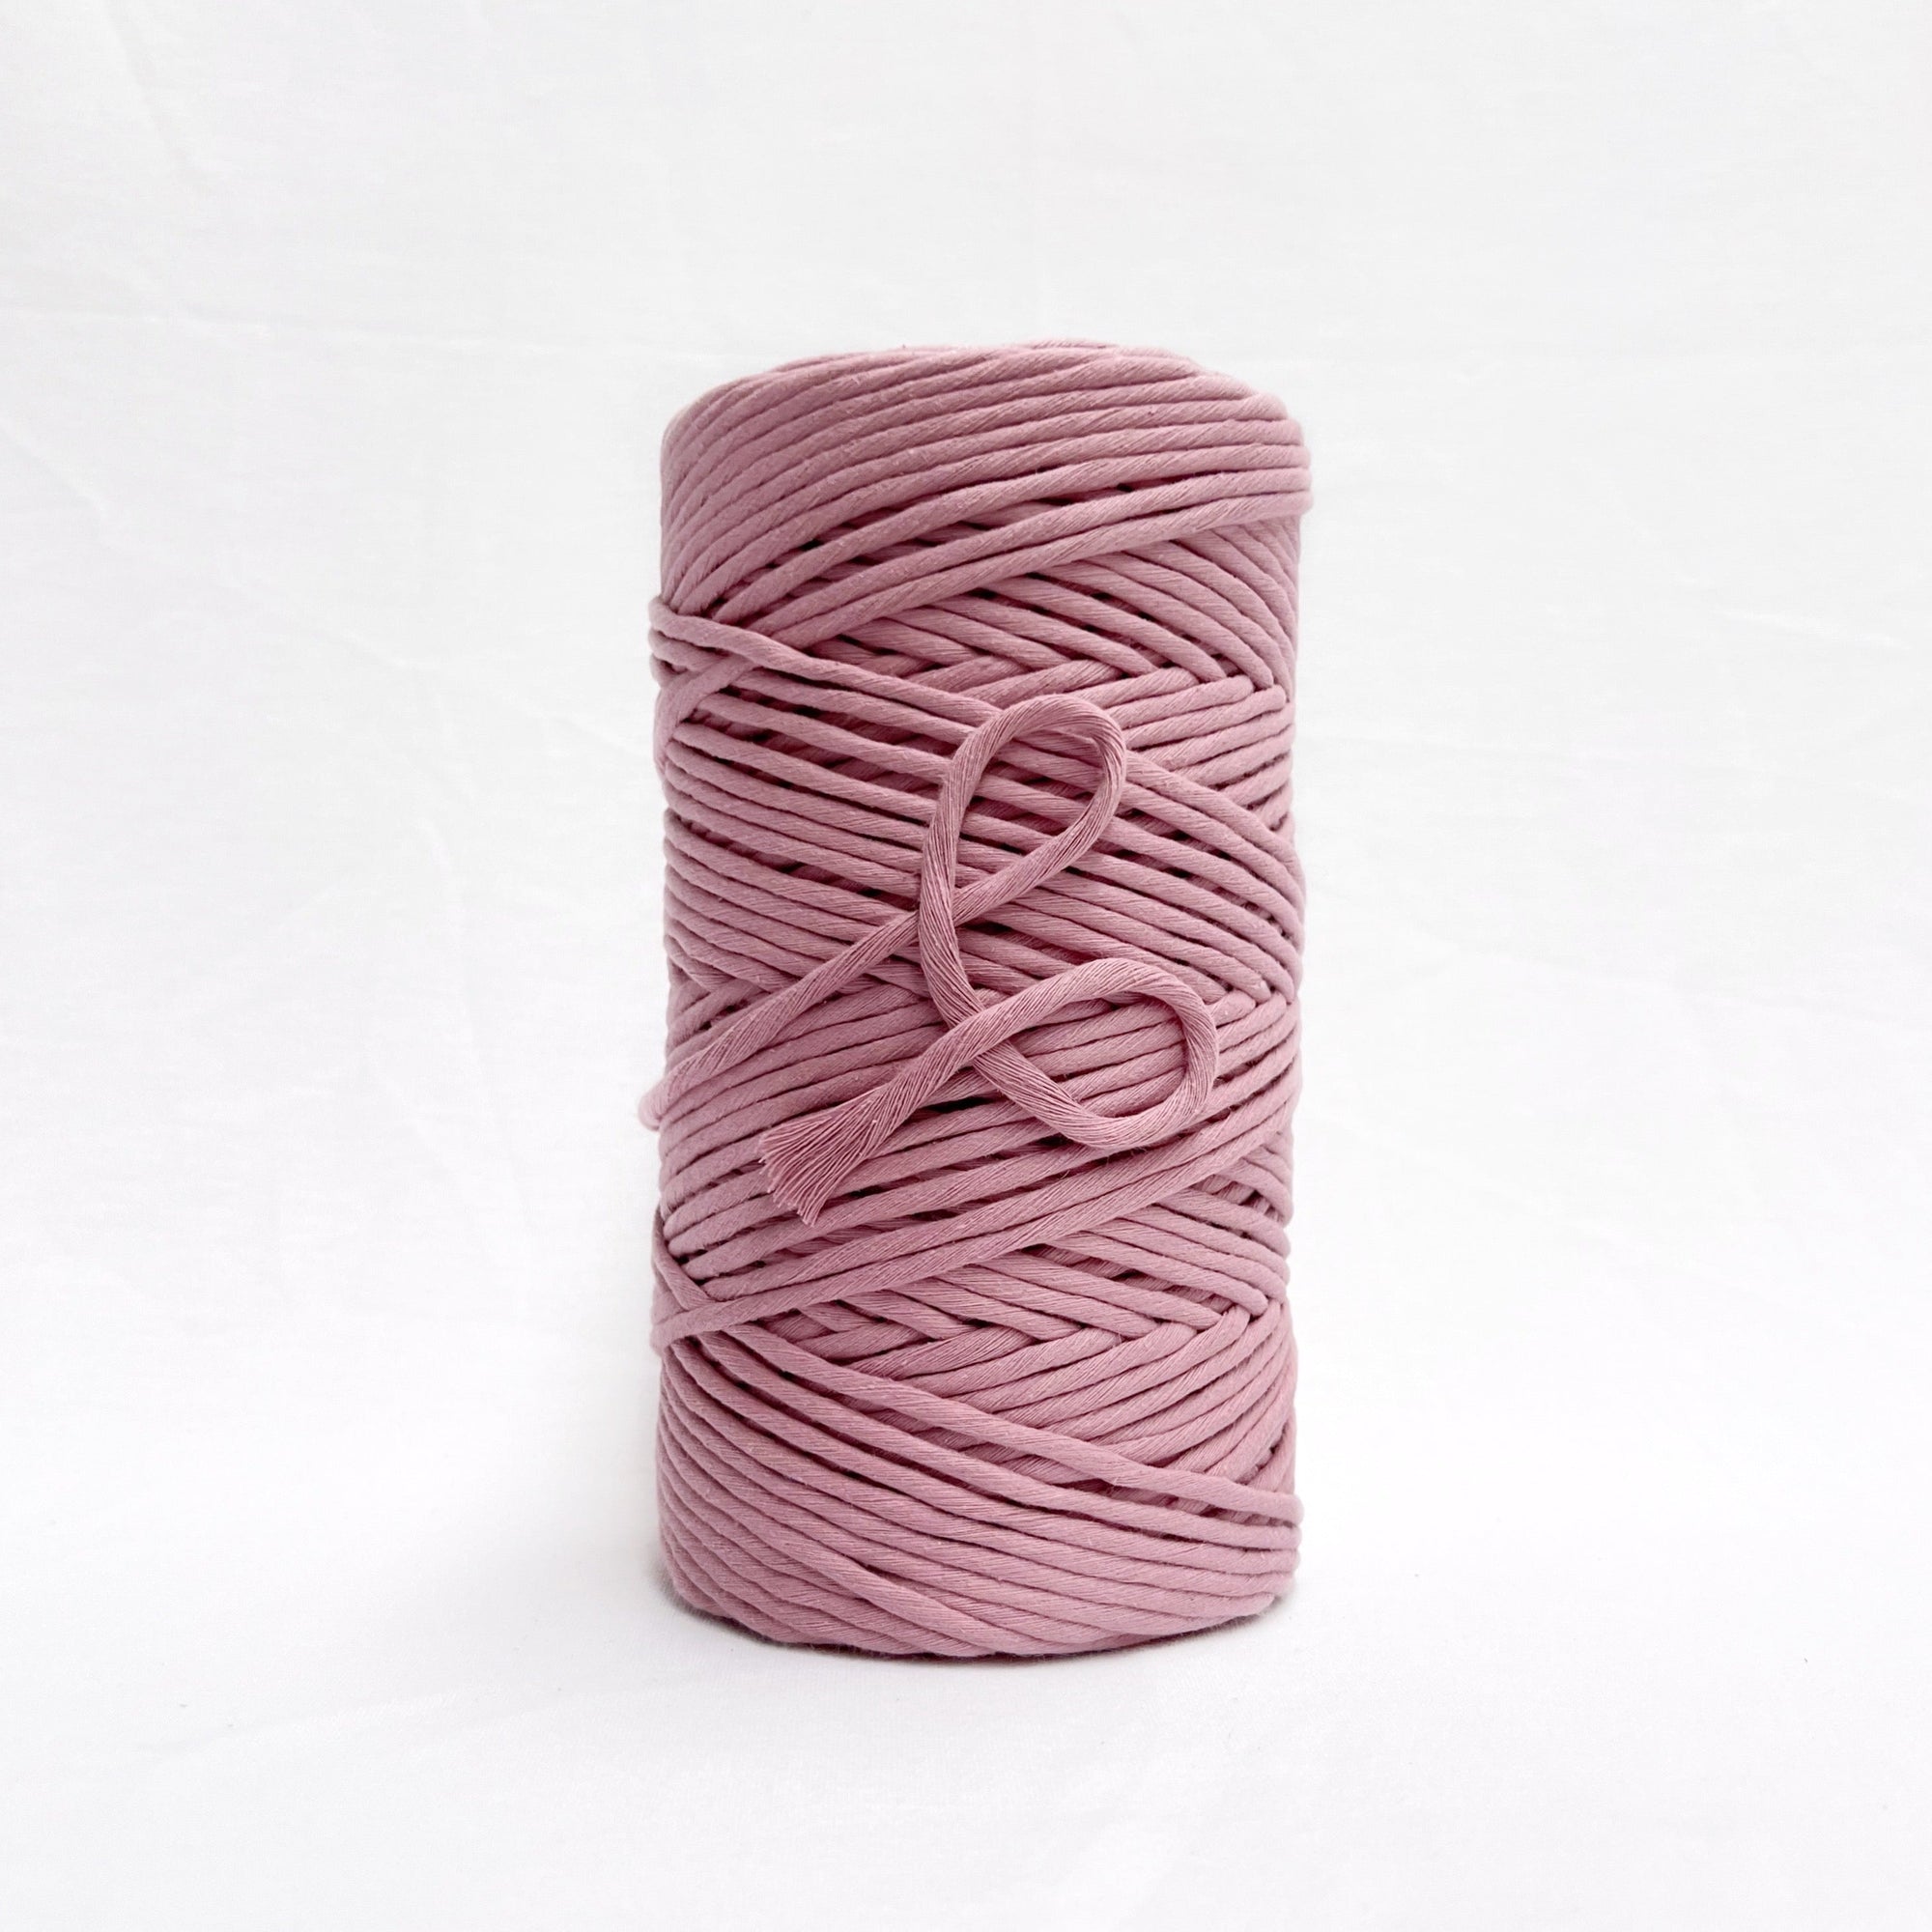 mary maker studio 1kg 5mm recycled cotton macrame string in vintage pink colour suitable for macrame workshops beginners and advanced artists